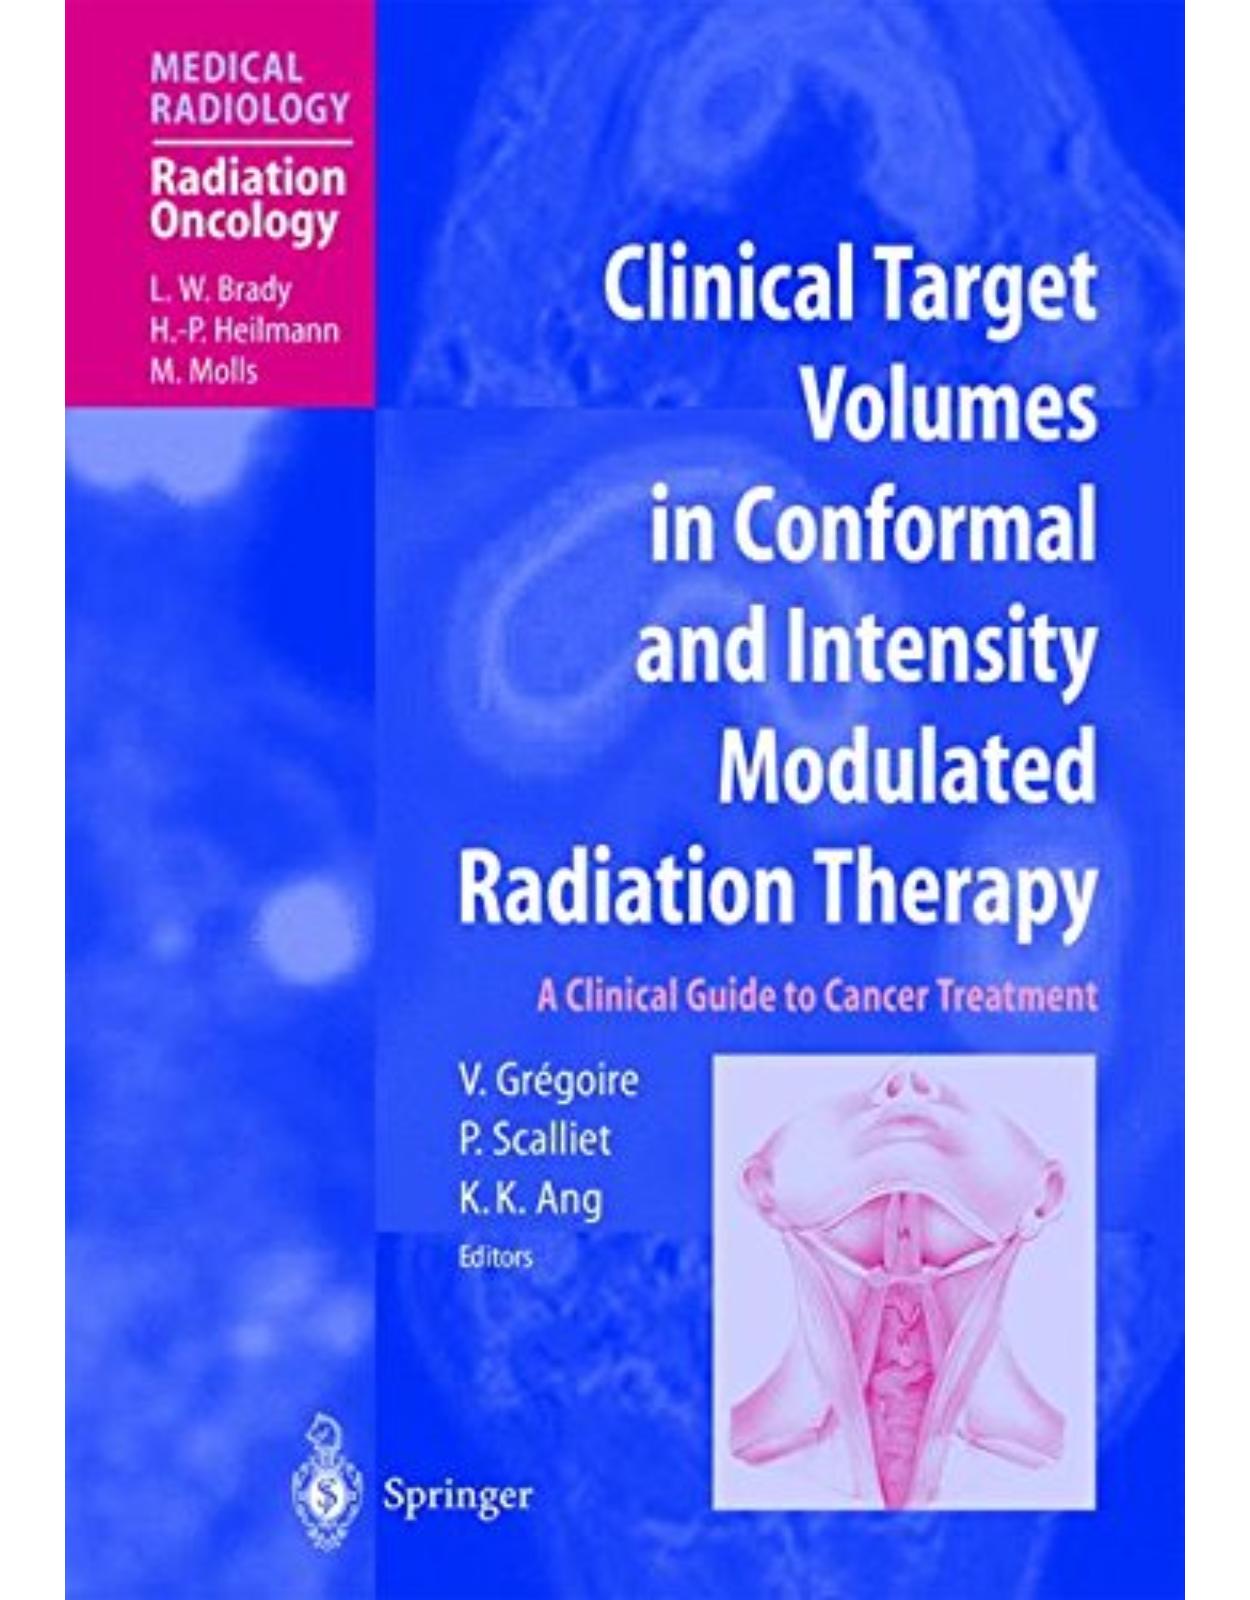 Clinical Target Volumes in Conformal and Intensity Modulated Radiation Therapy. A Clinical Guide to Cancer Treatment